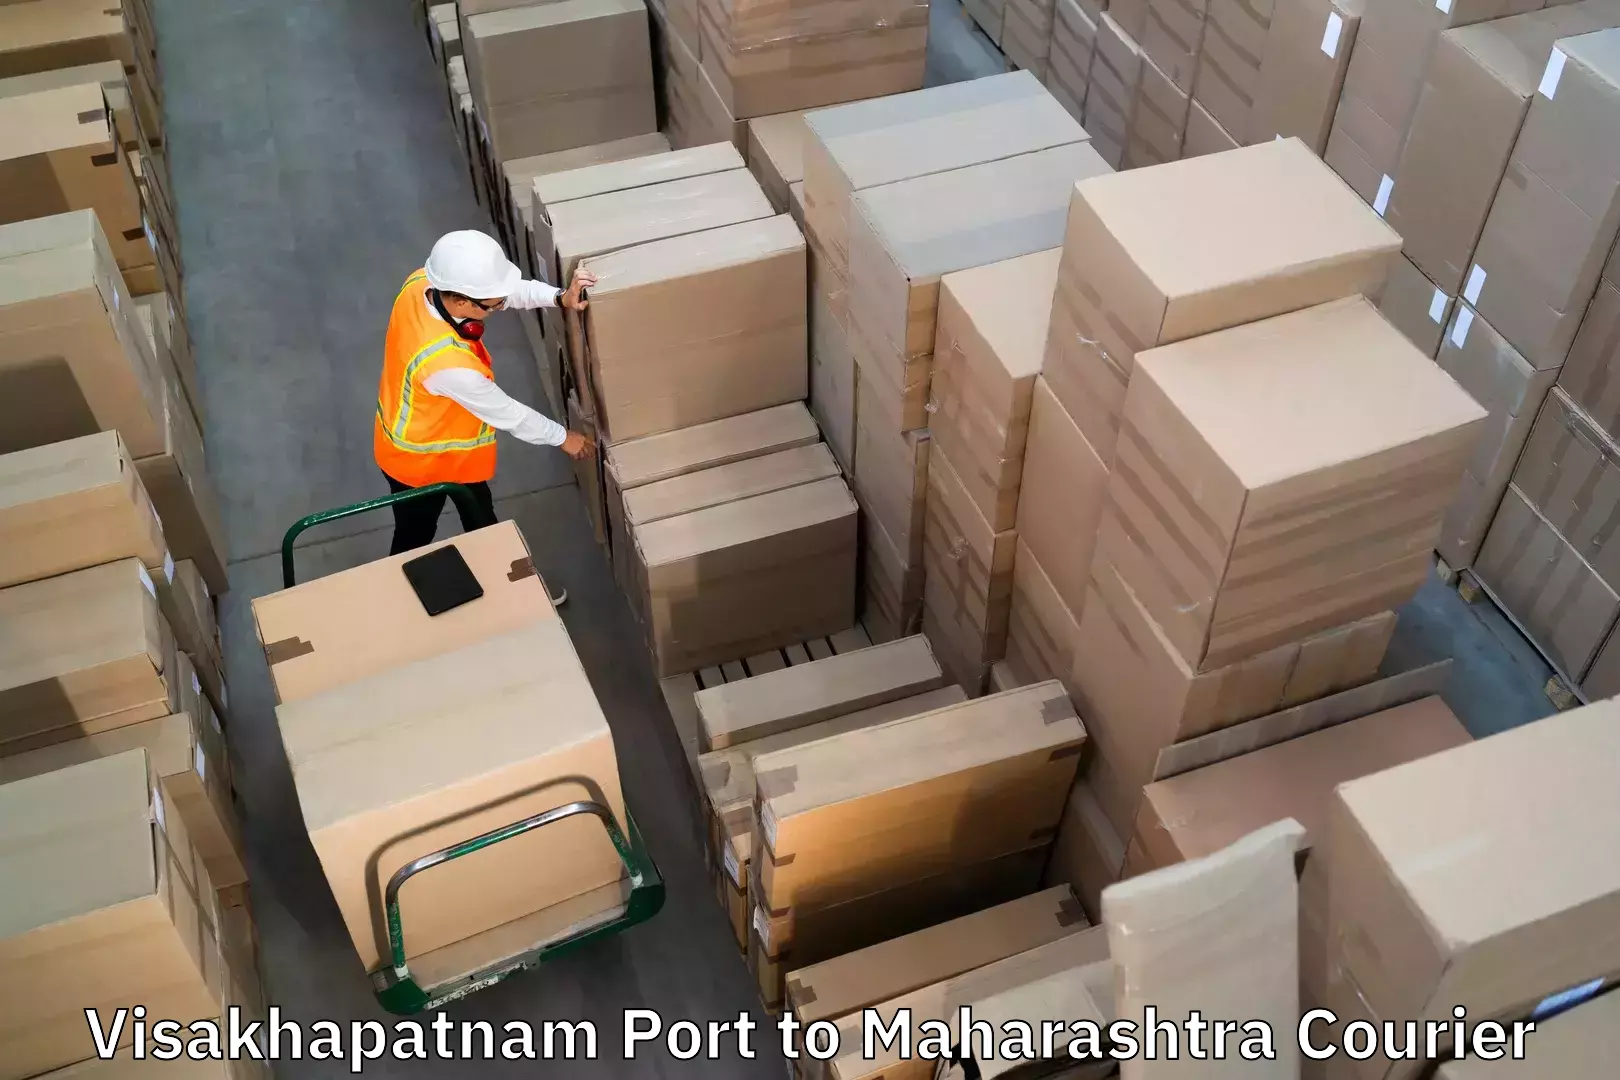 Luggage shipment strategy Visakhapatnam Port to Dharmabad